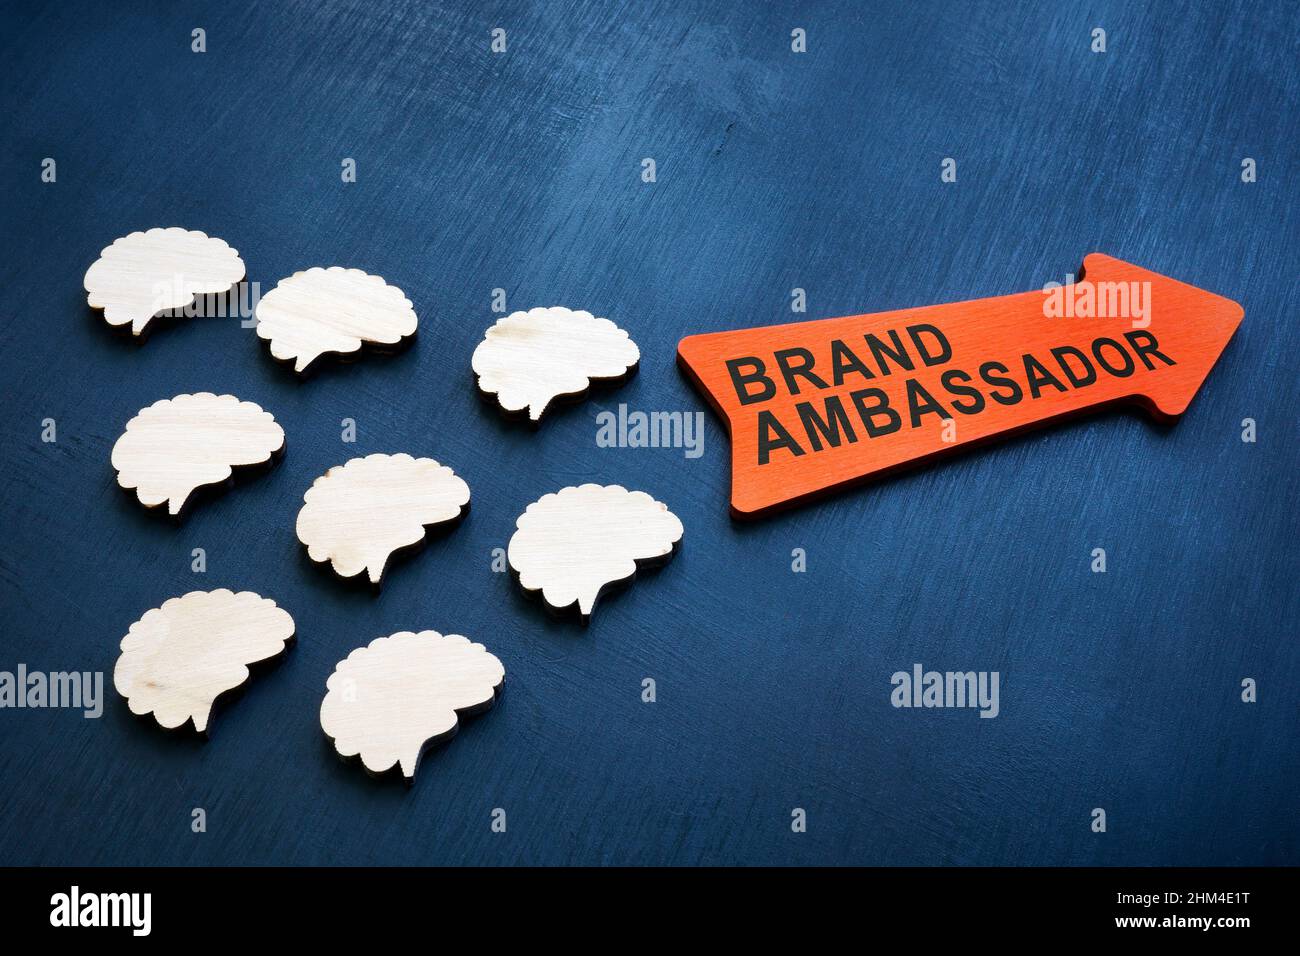 Brains and arrow on the surface. Brand ambassador concept. Stock Photo